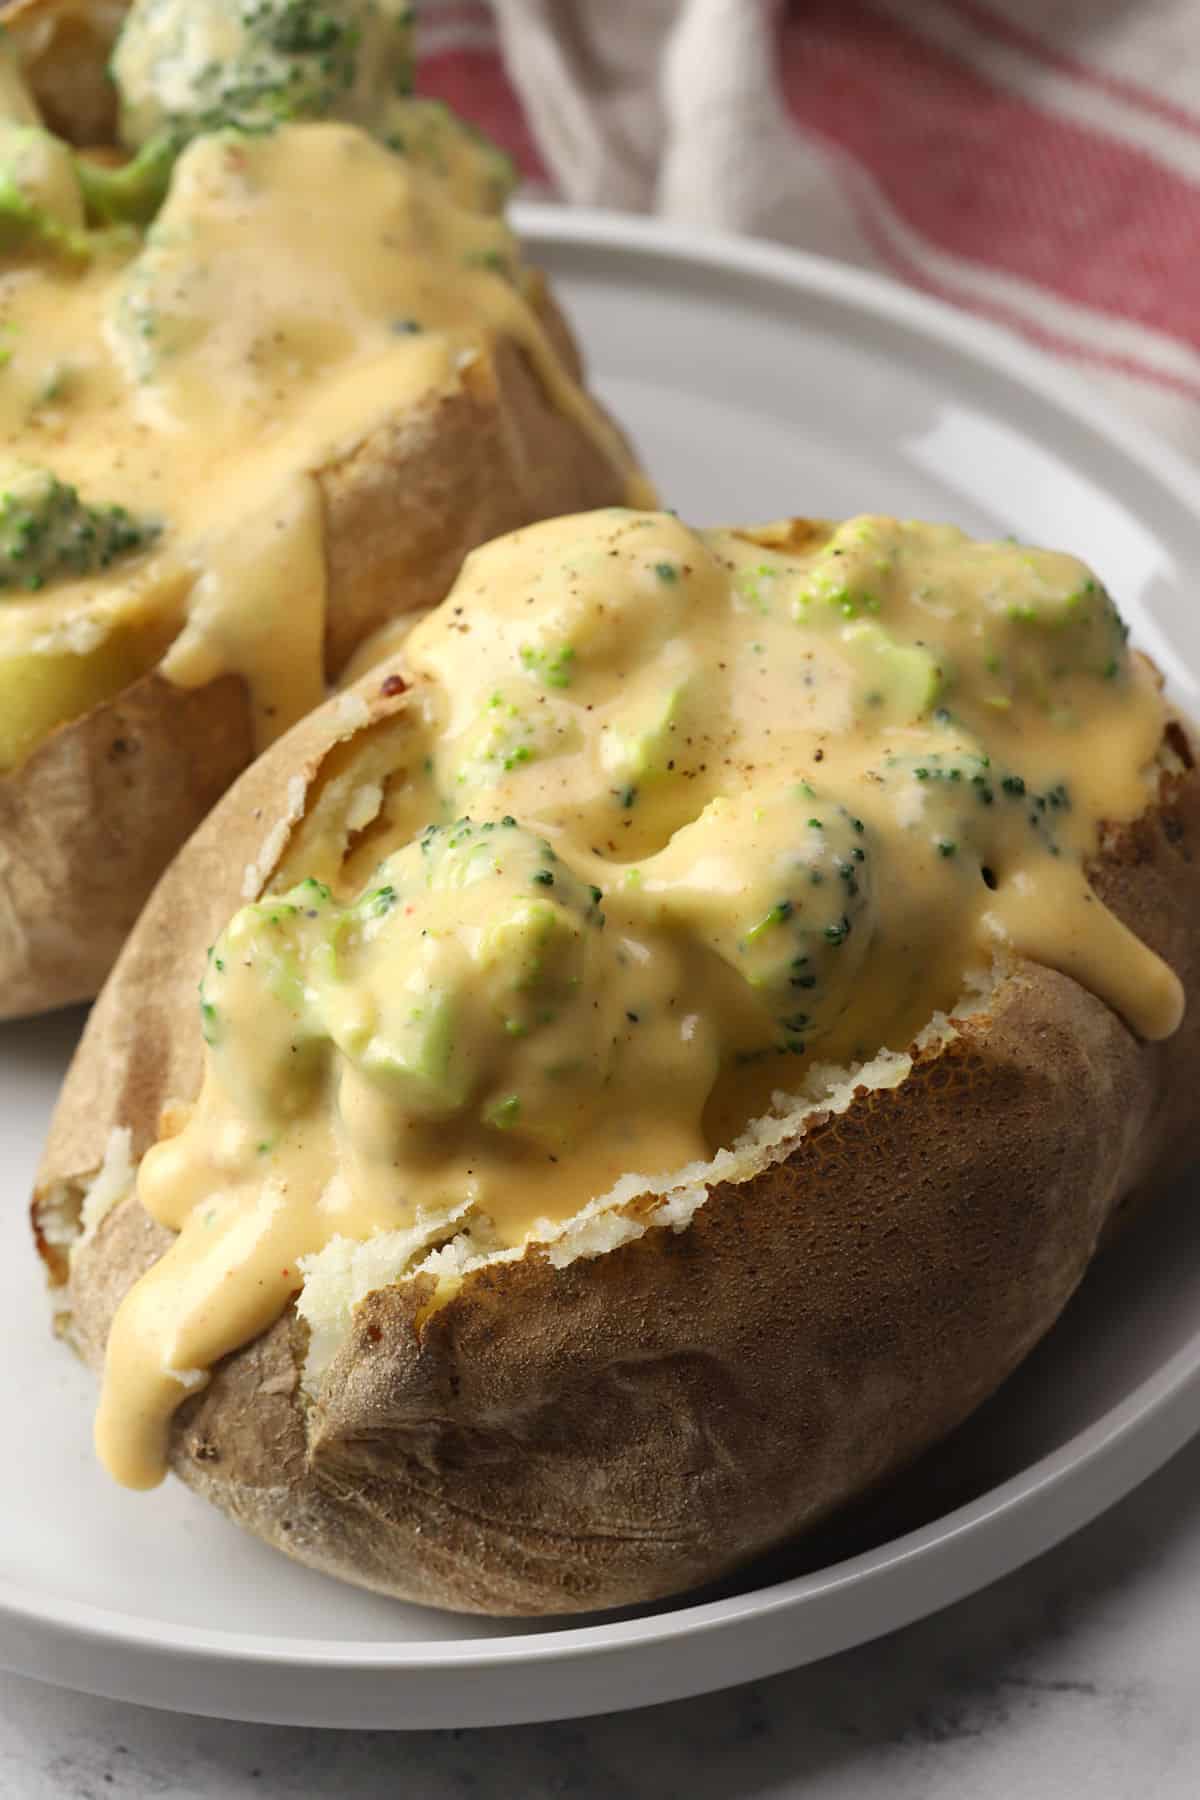 Close up of broccoli cheese sauce on a baked potato.